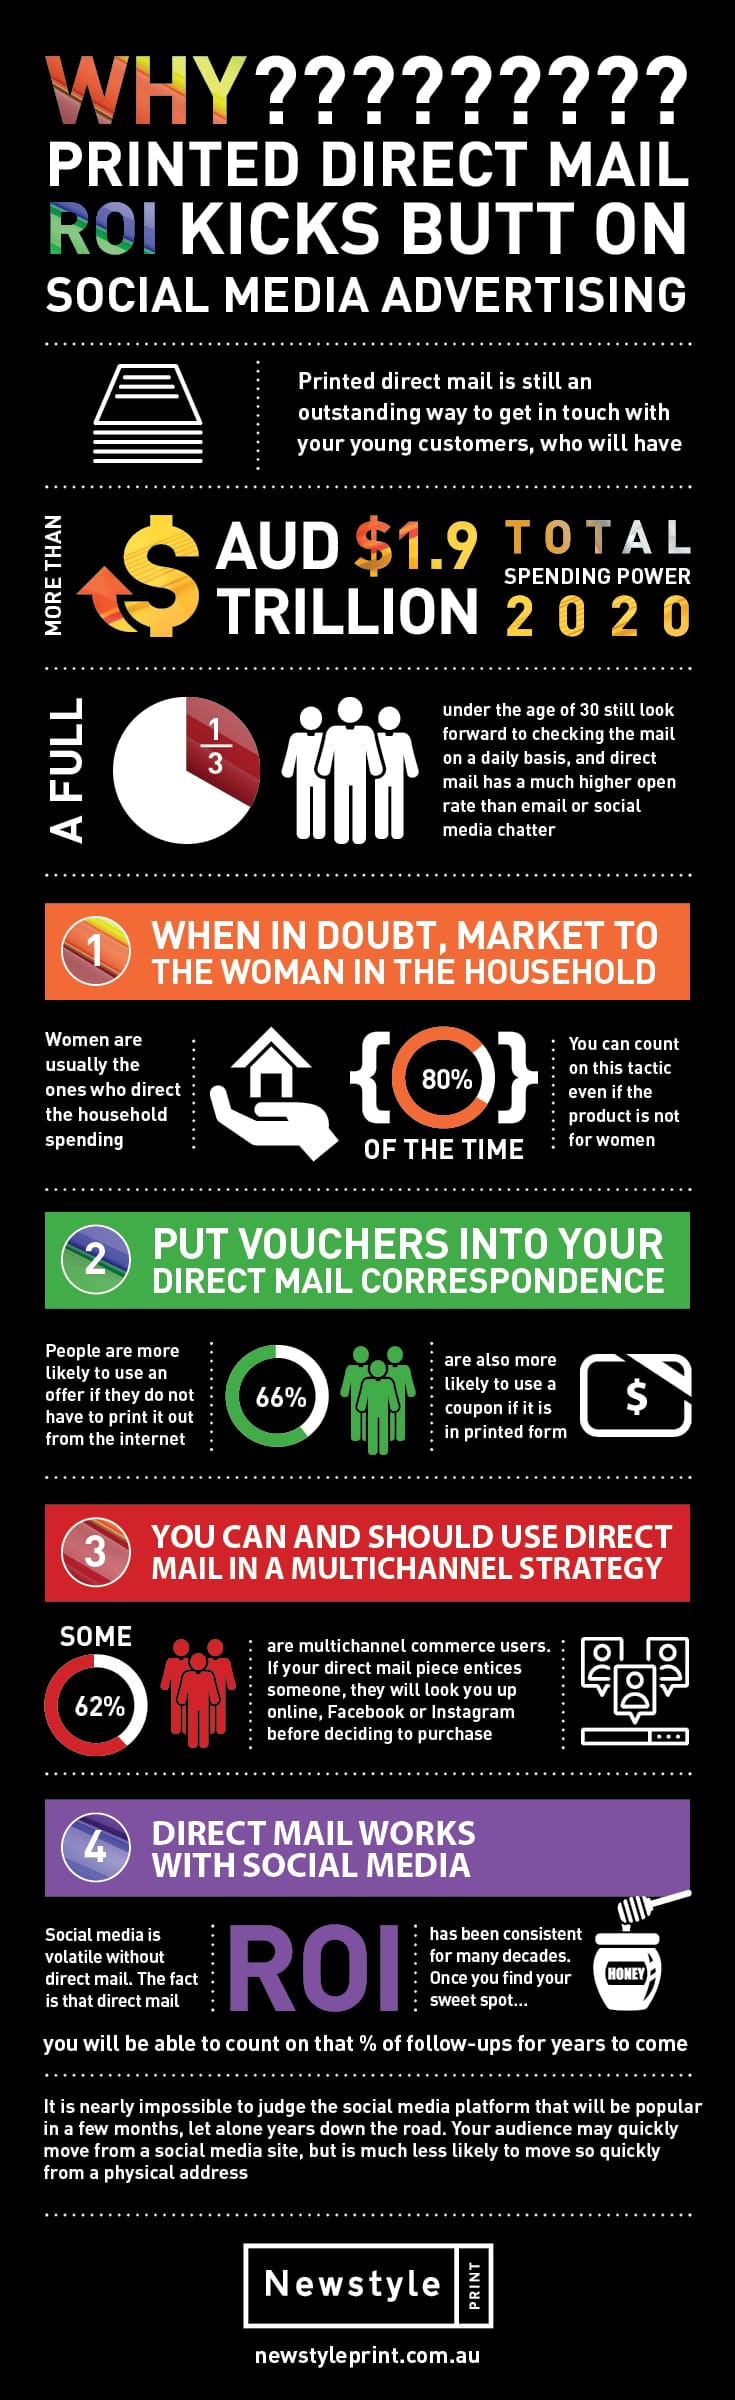 Printed Direct Mail Versus Social Media Advertising [infographic]